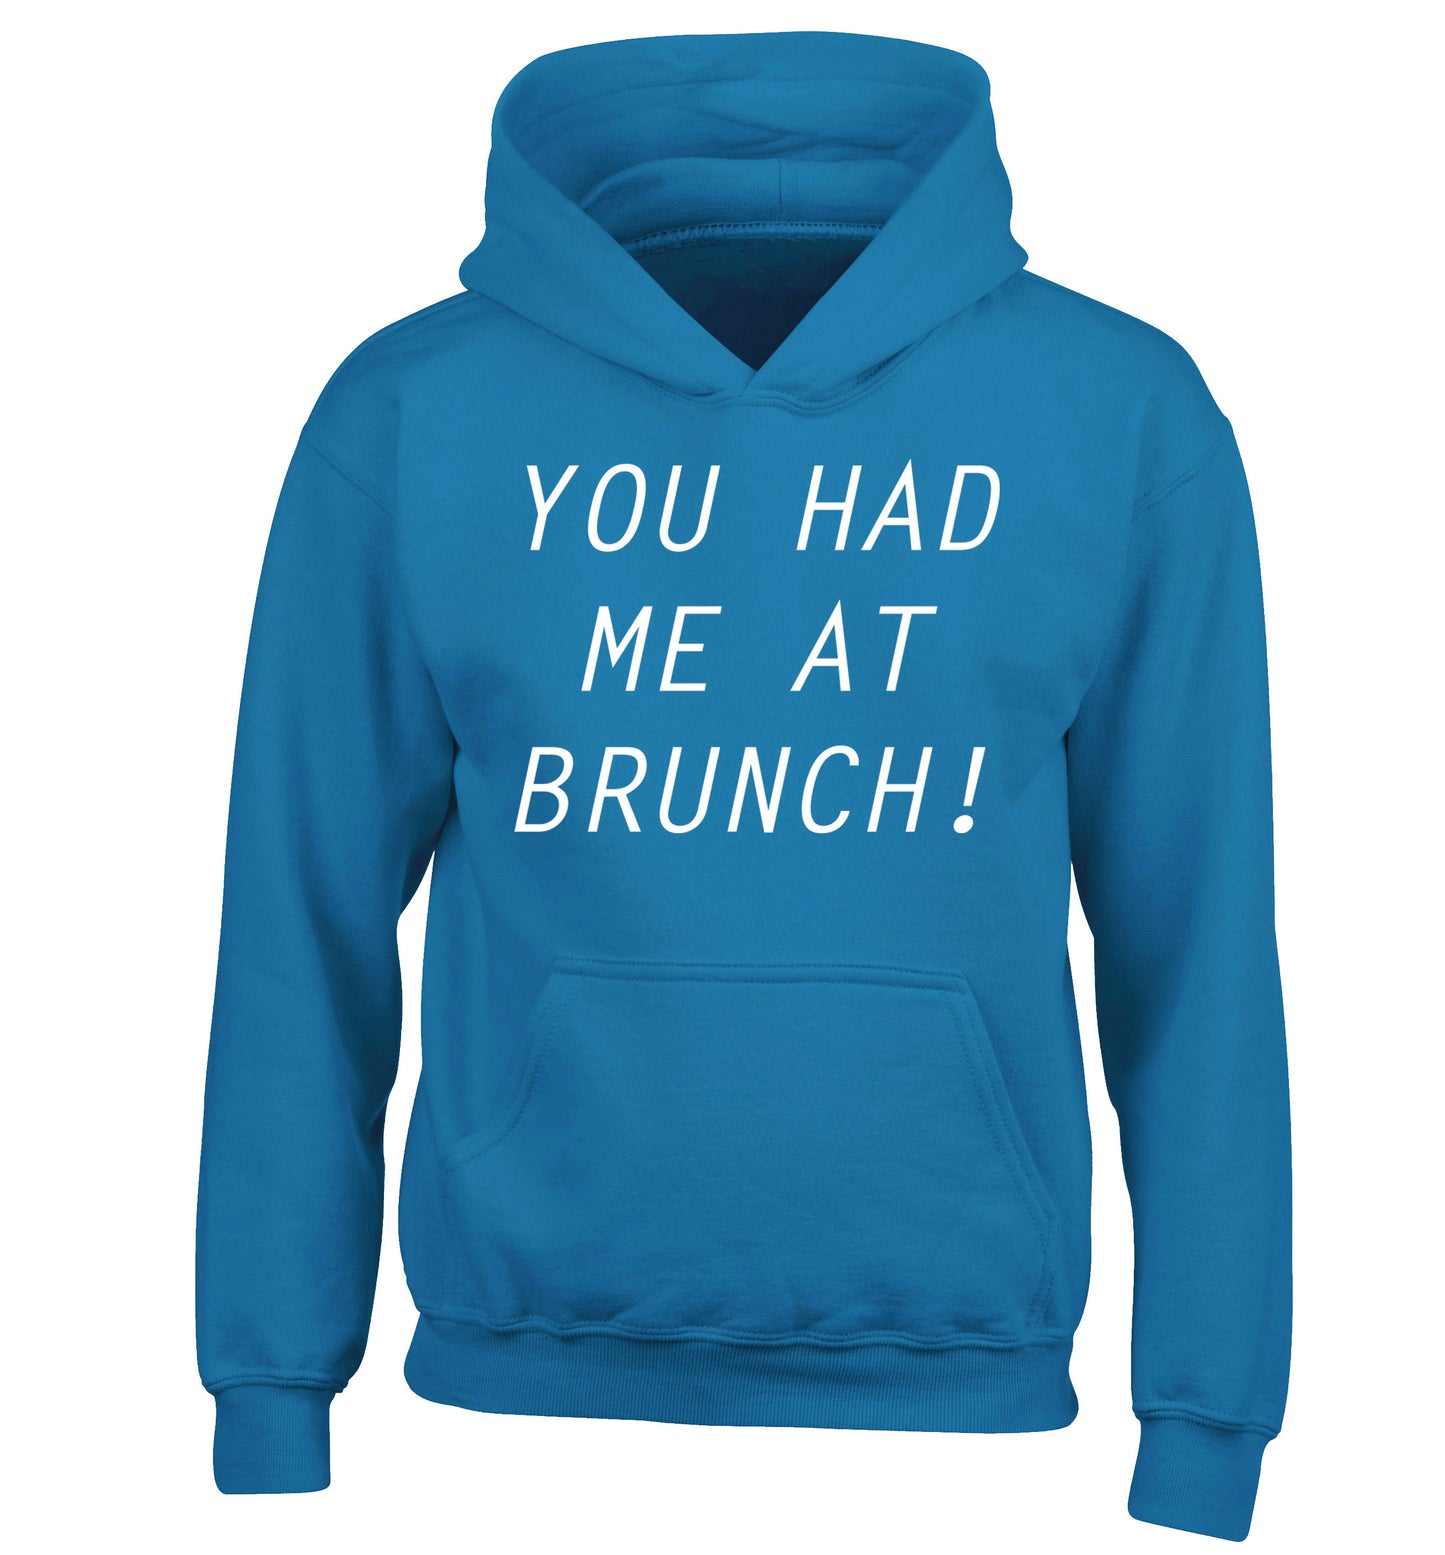 You had me at brunch children's blue hoodie 12-14 Years